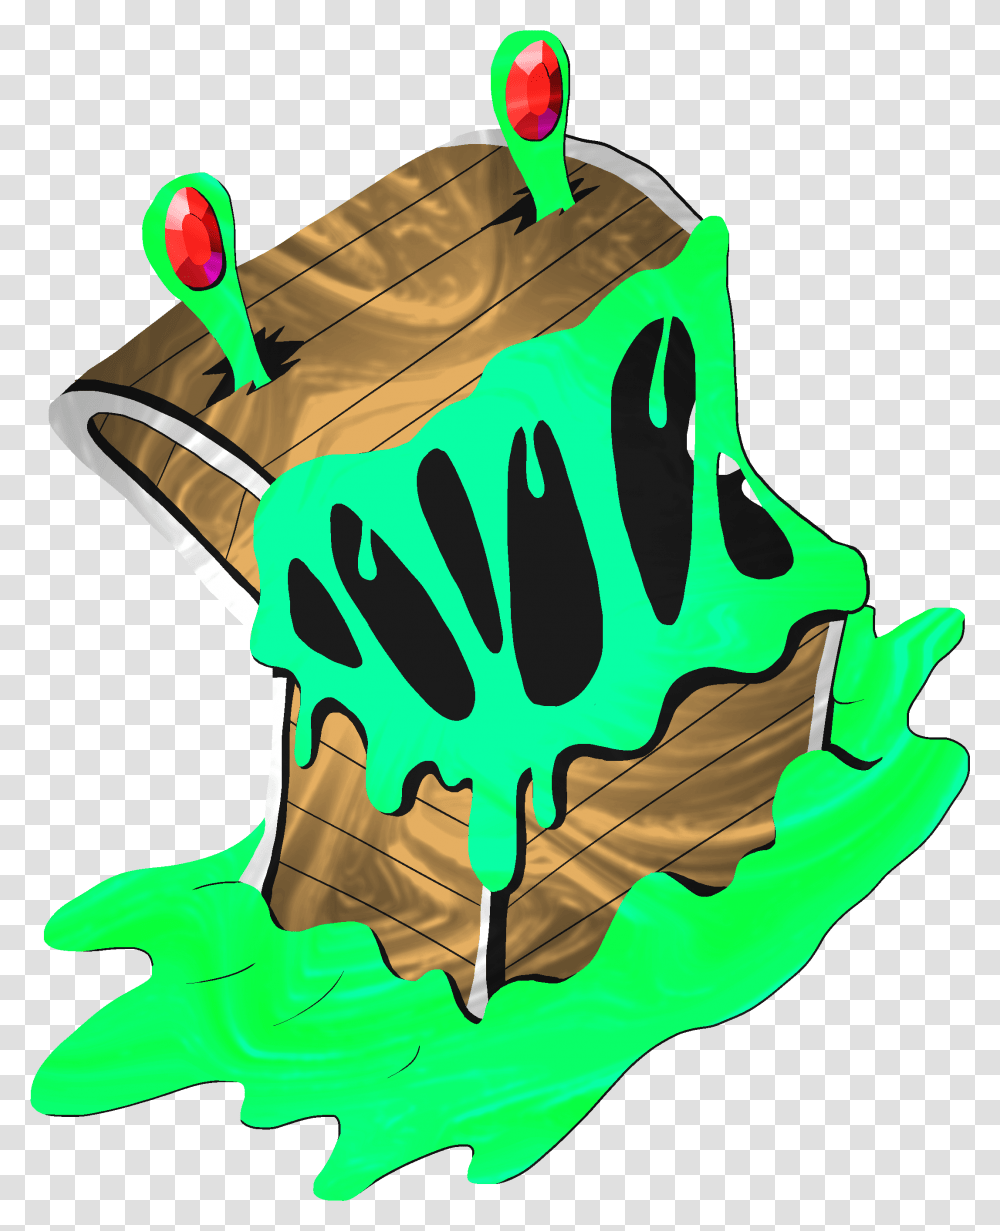 Download Mimic Slime Birthday Cake Image With No, Weapon, Weaponry, Clothing, Apparel Transparent Png